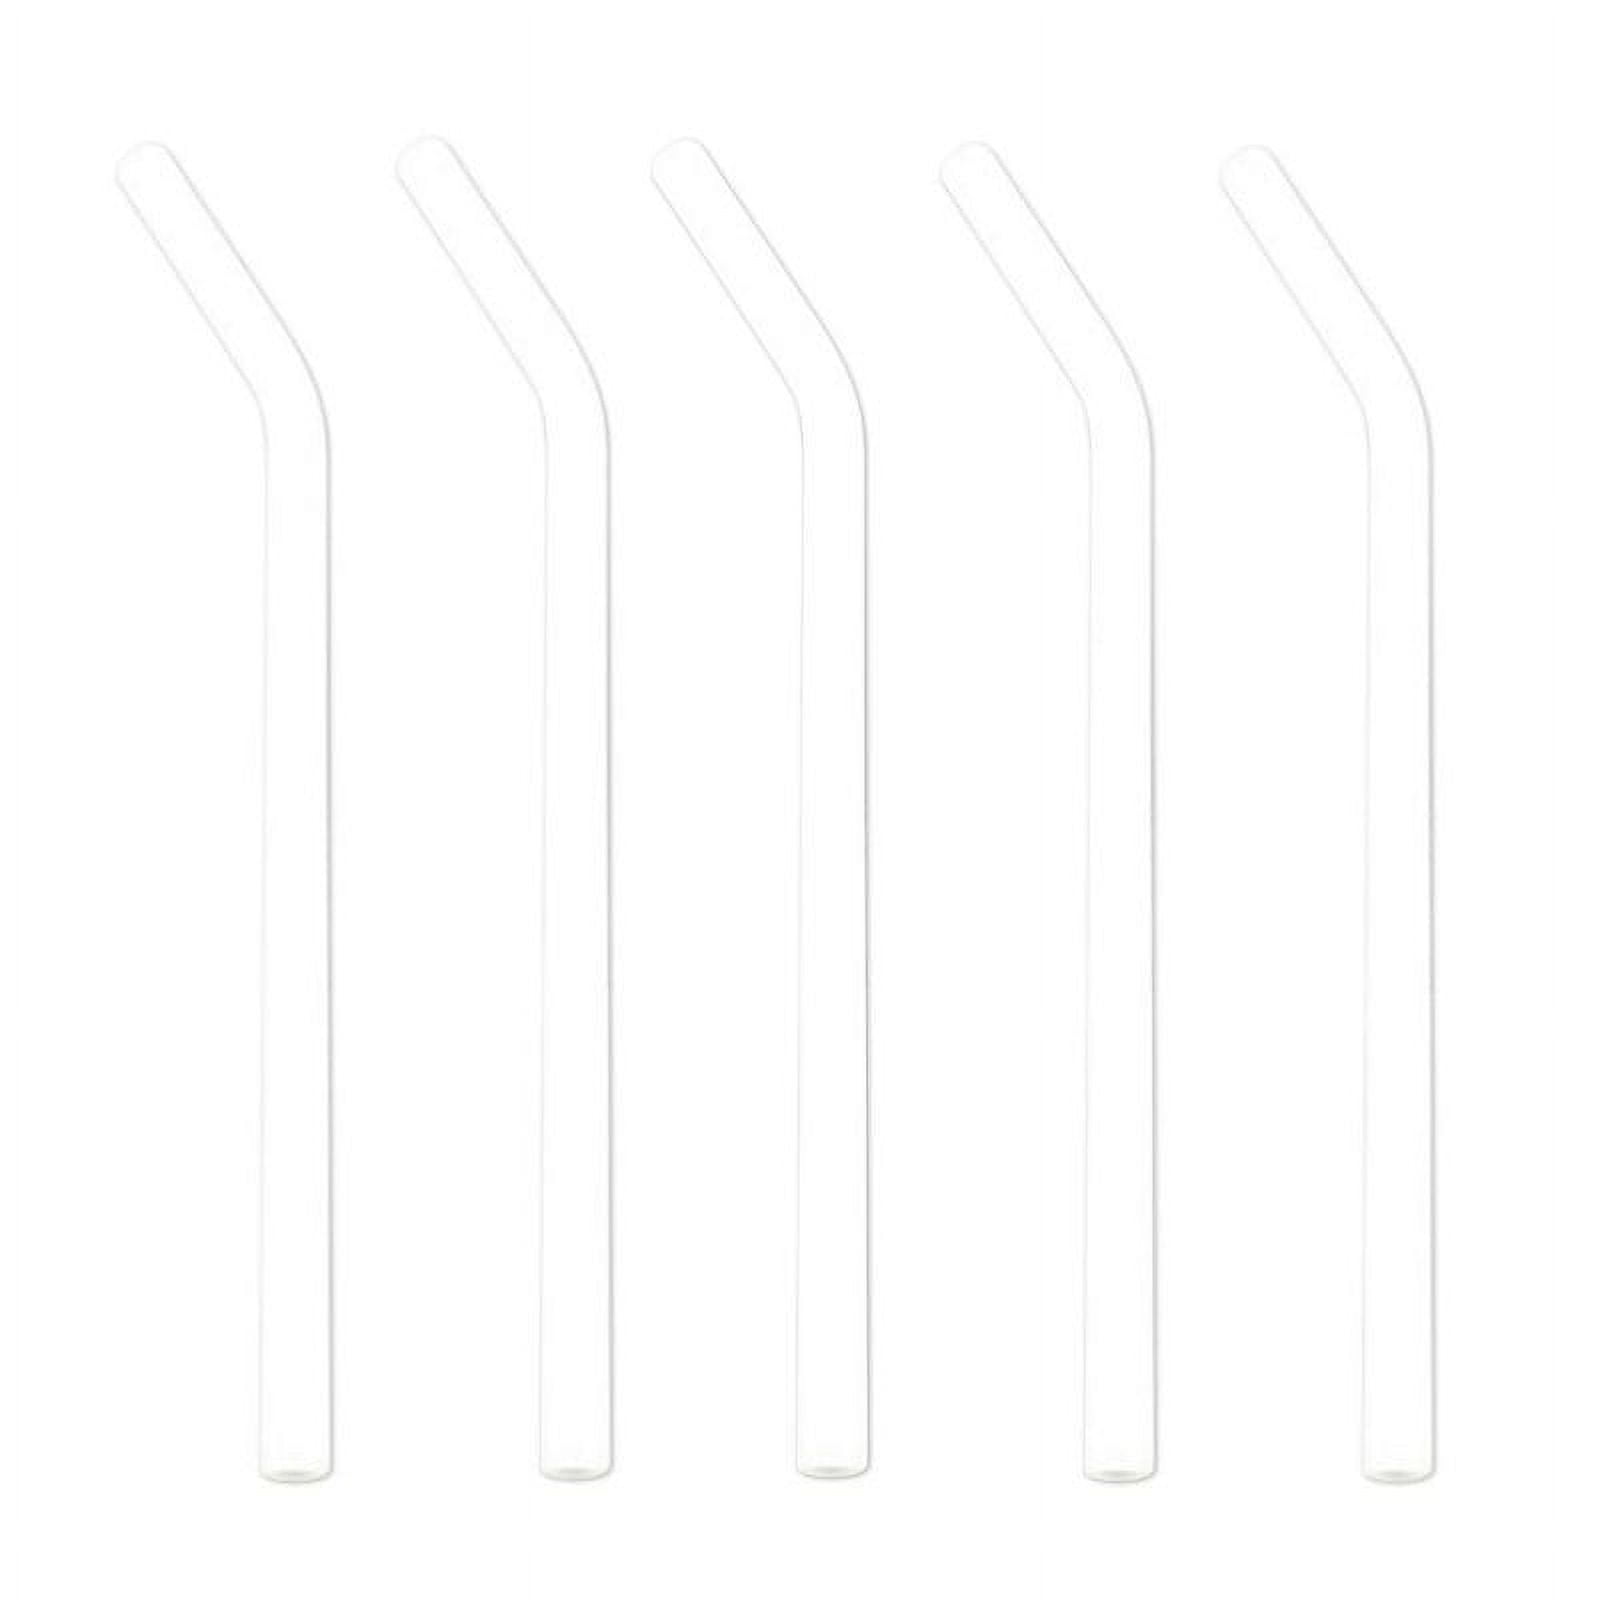 Reusable Glass Straws, 5Pcs 8mm Bent Glass Drinking Straws, Non-Toxic, BPA  Free Glass Straws for Beverages, Shakes, Milk Tea, Juices, Bright Blue